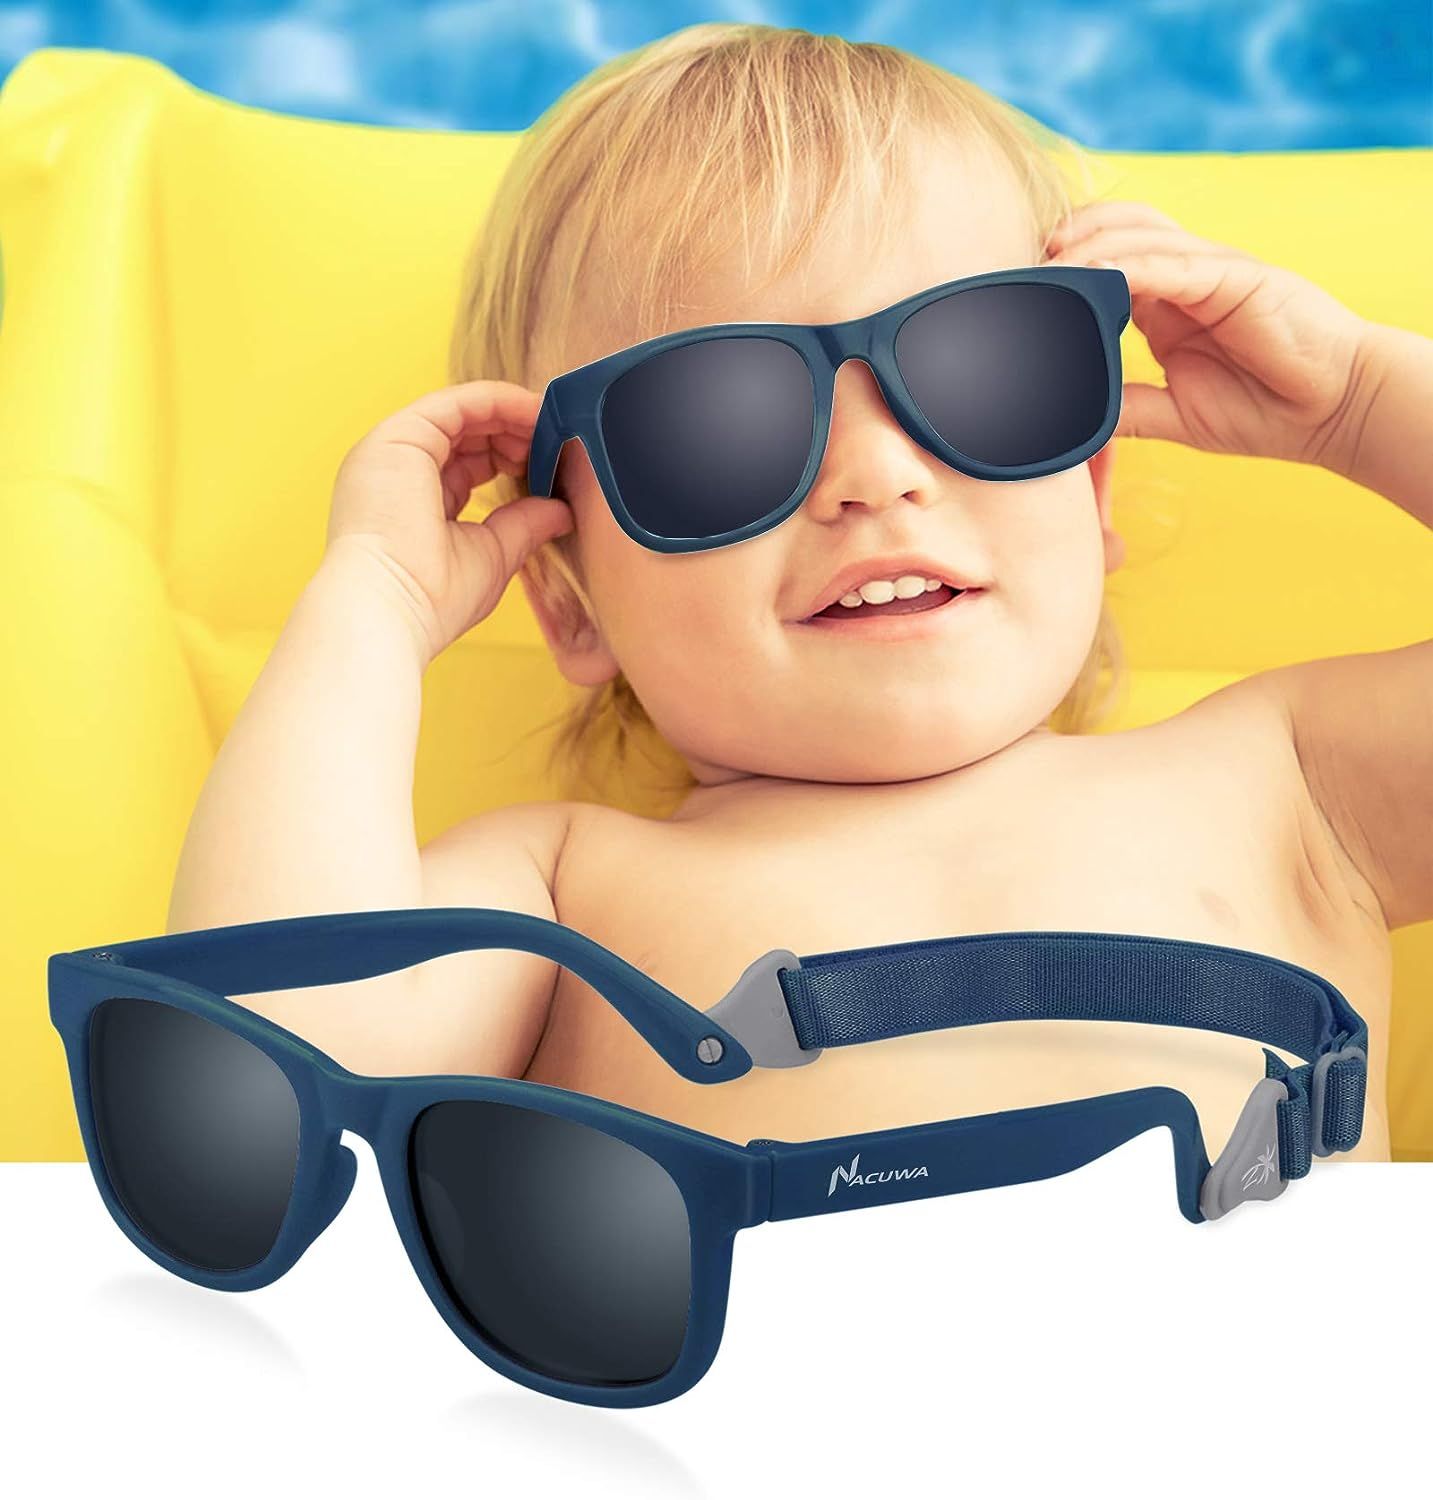 Nacuwa Baby Sunglasses - 100% UV Proof Sunglasses for Baby, Toddler, Kids - Ages 0-2 Years - Case... | Amazon (US)